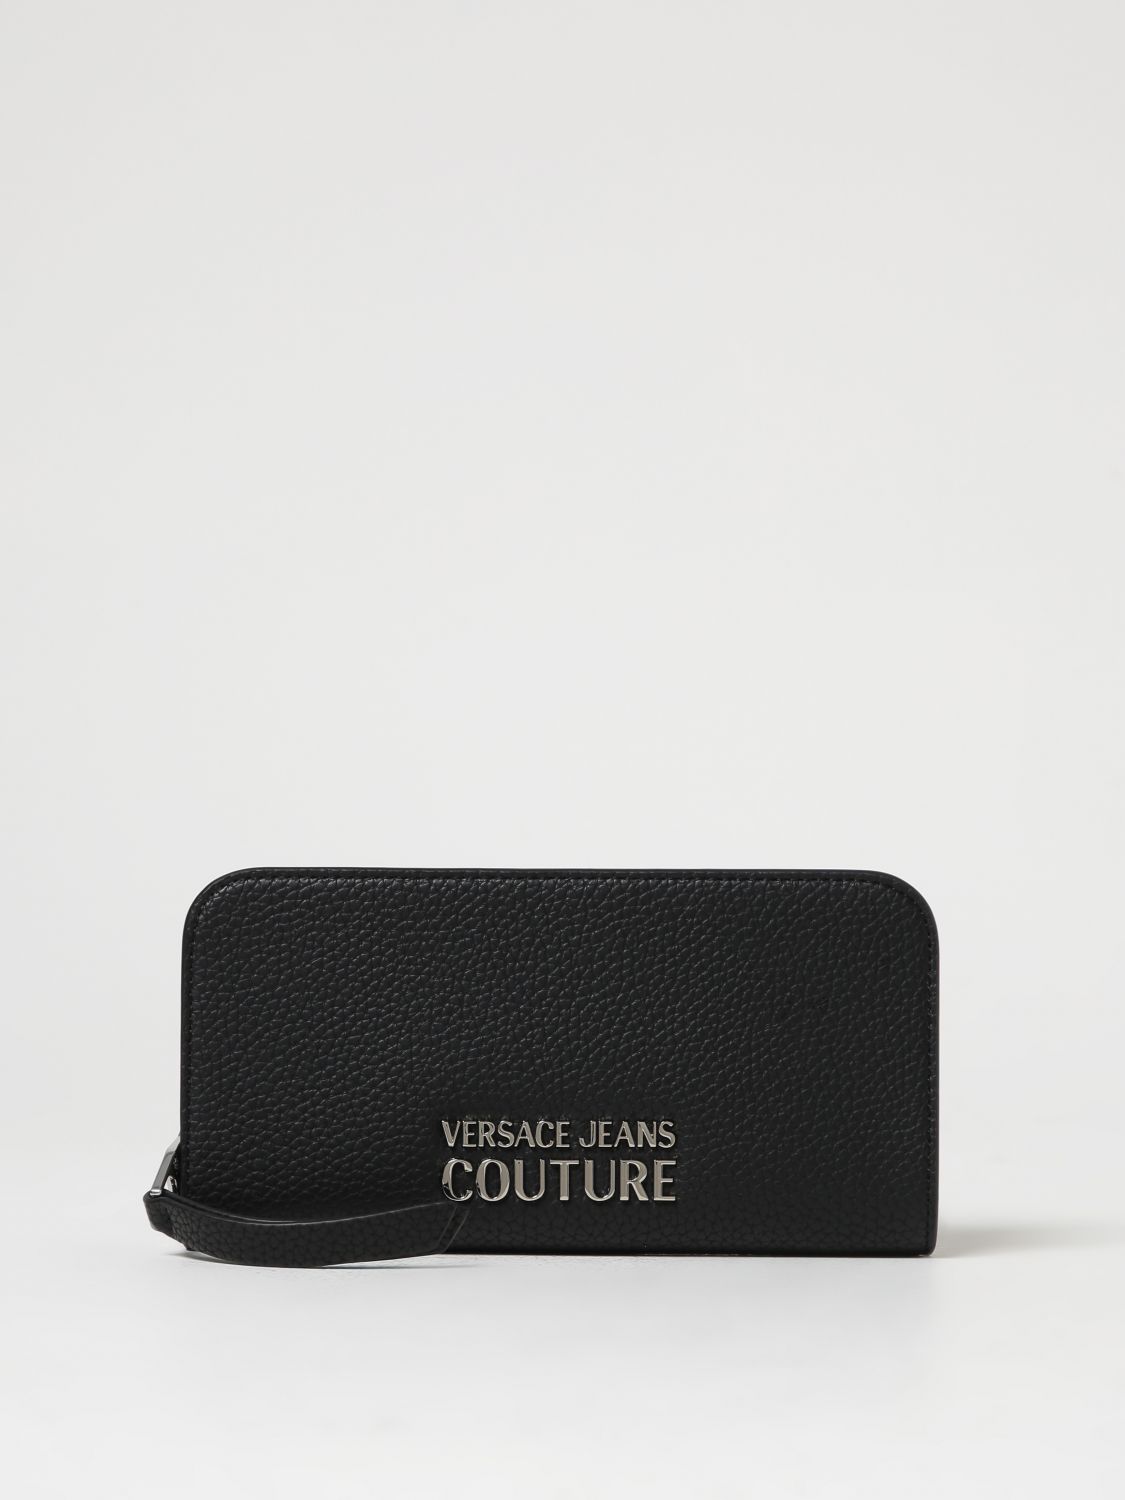 Versace Jeans Couture 钱包  女士 颜色 黑色 In Black